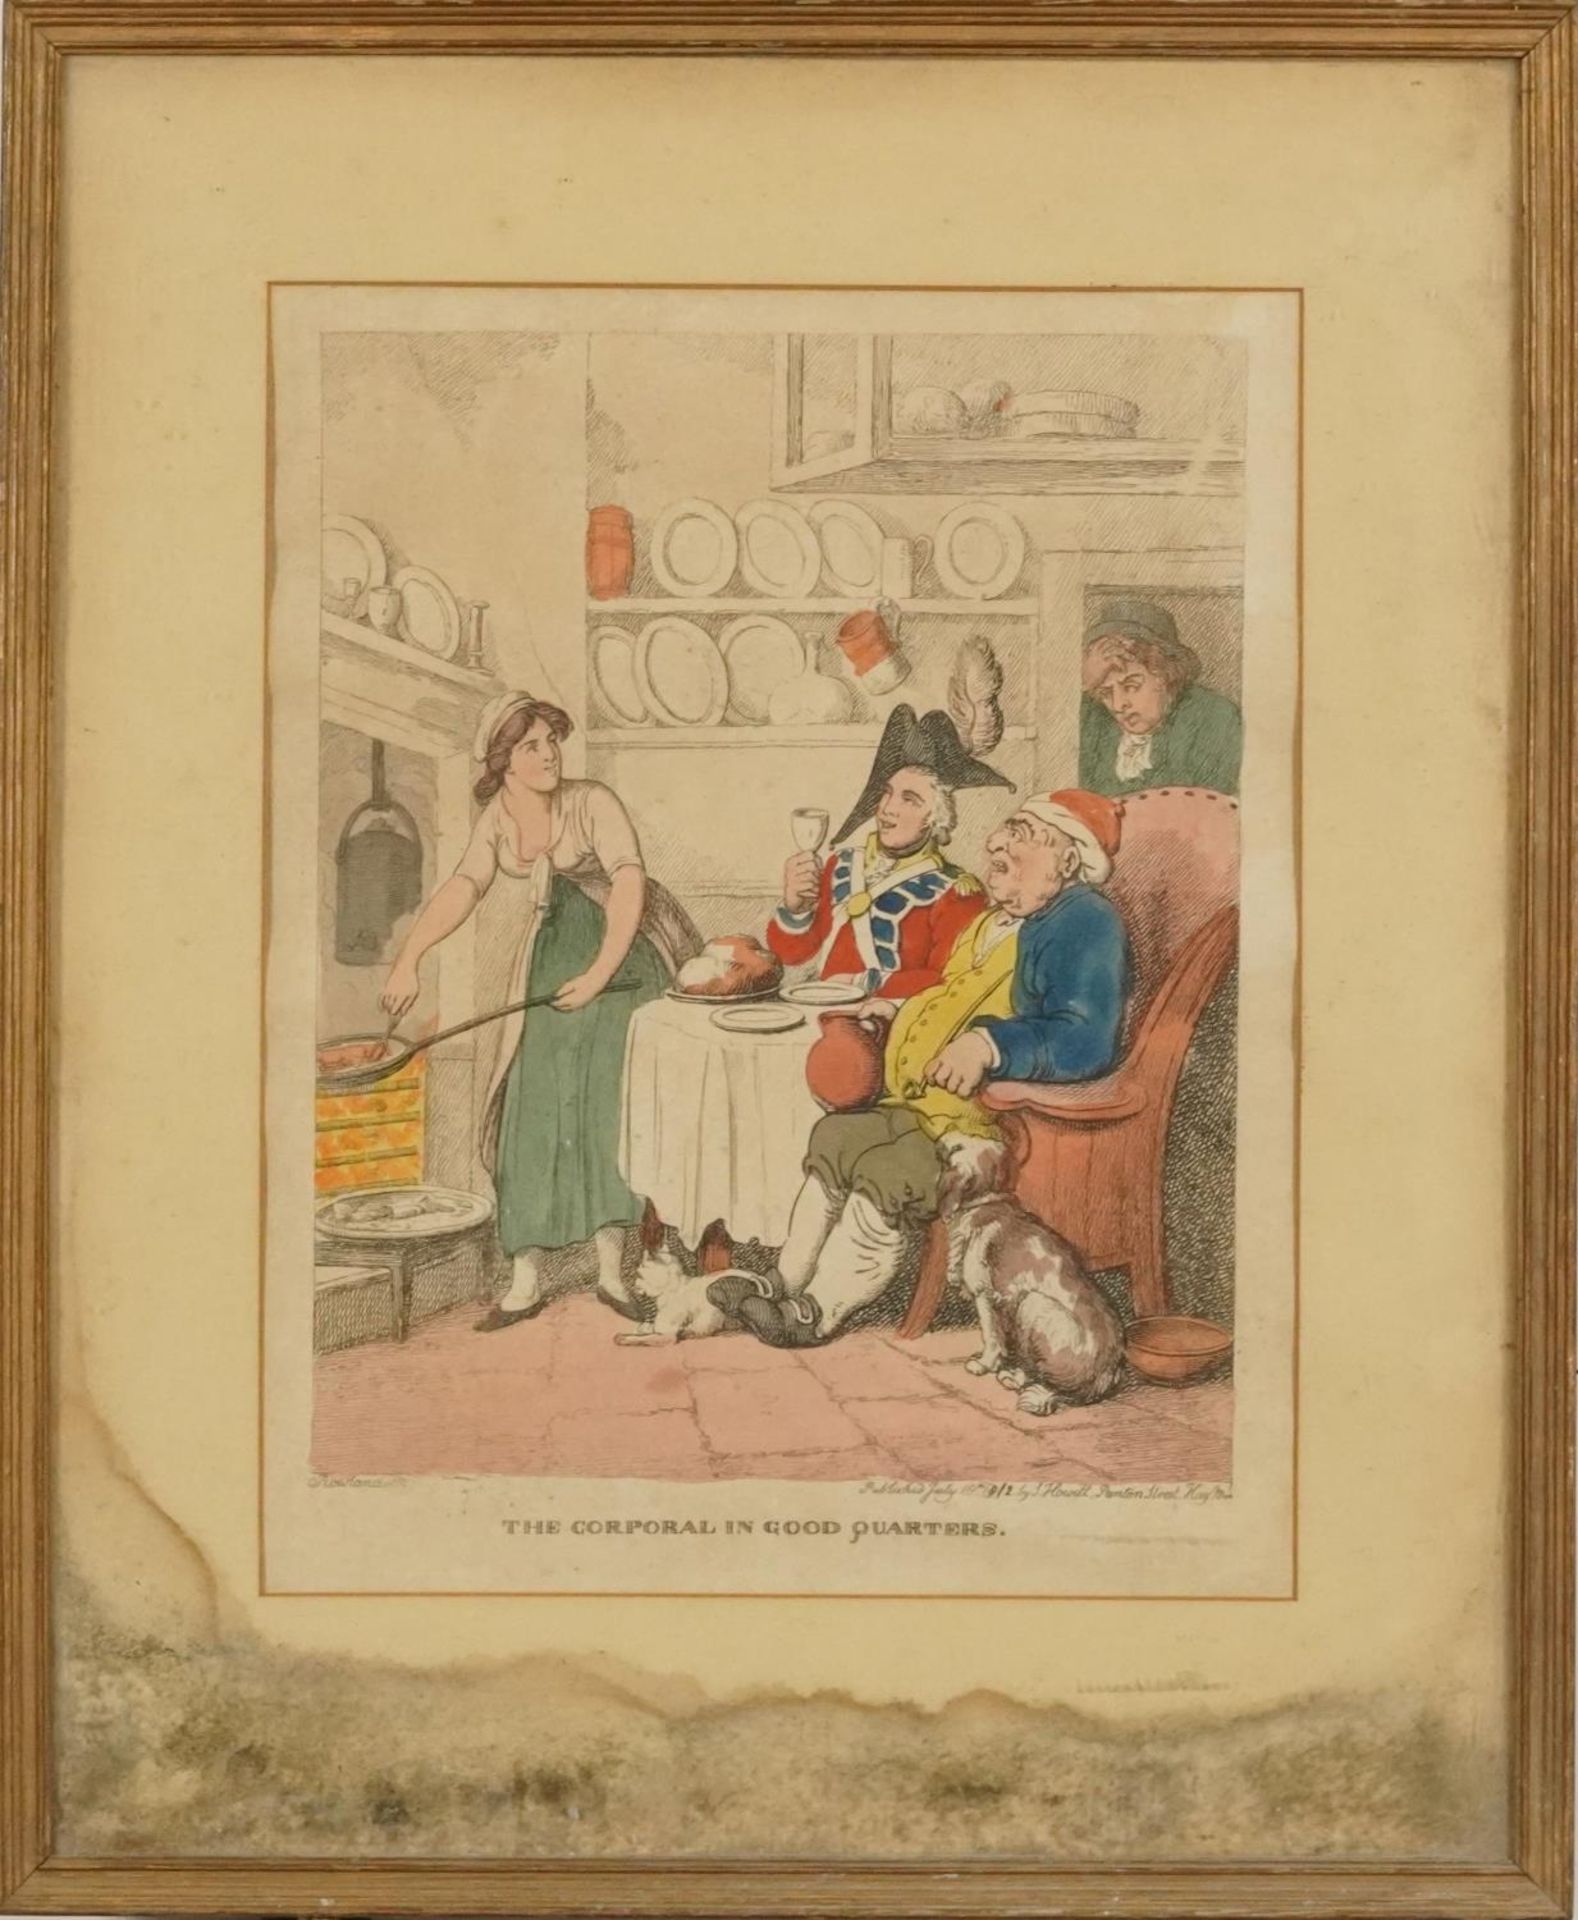 After Thomas Rowlandson - The Corporal in Good Quarters, 19th century satirical etching in colour, - Image 2 of 4